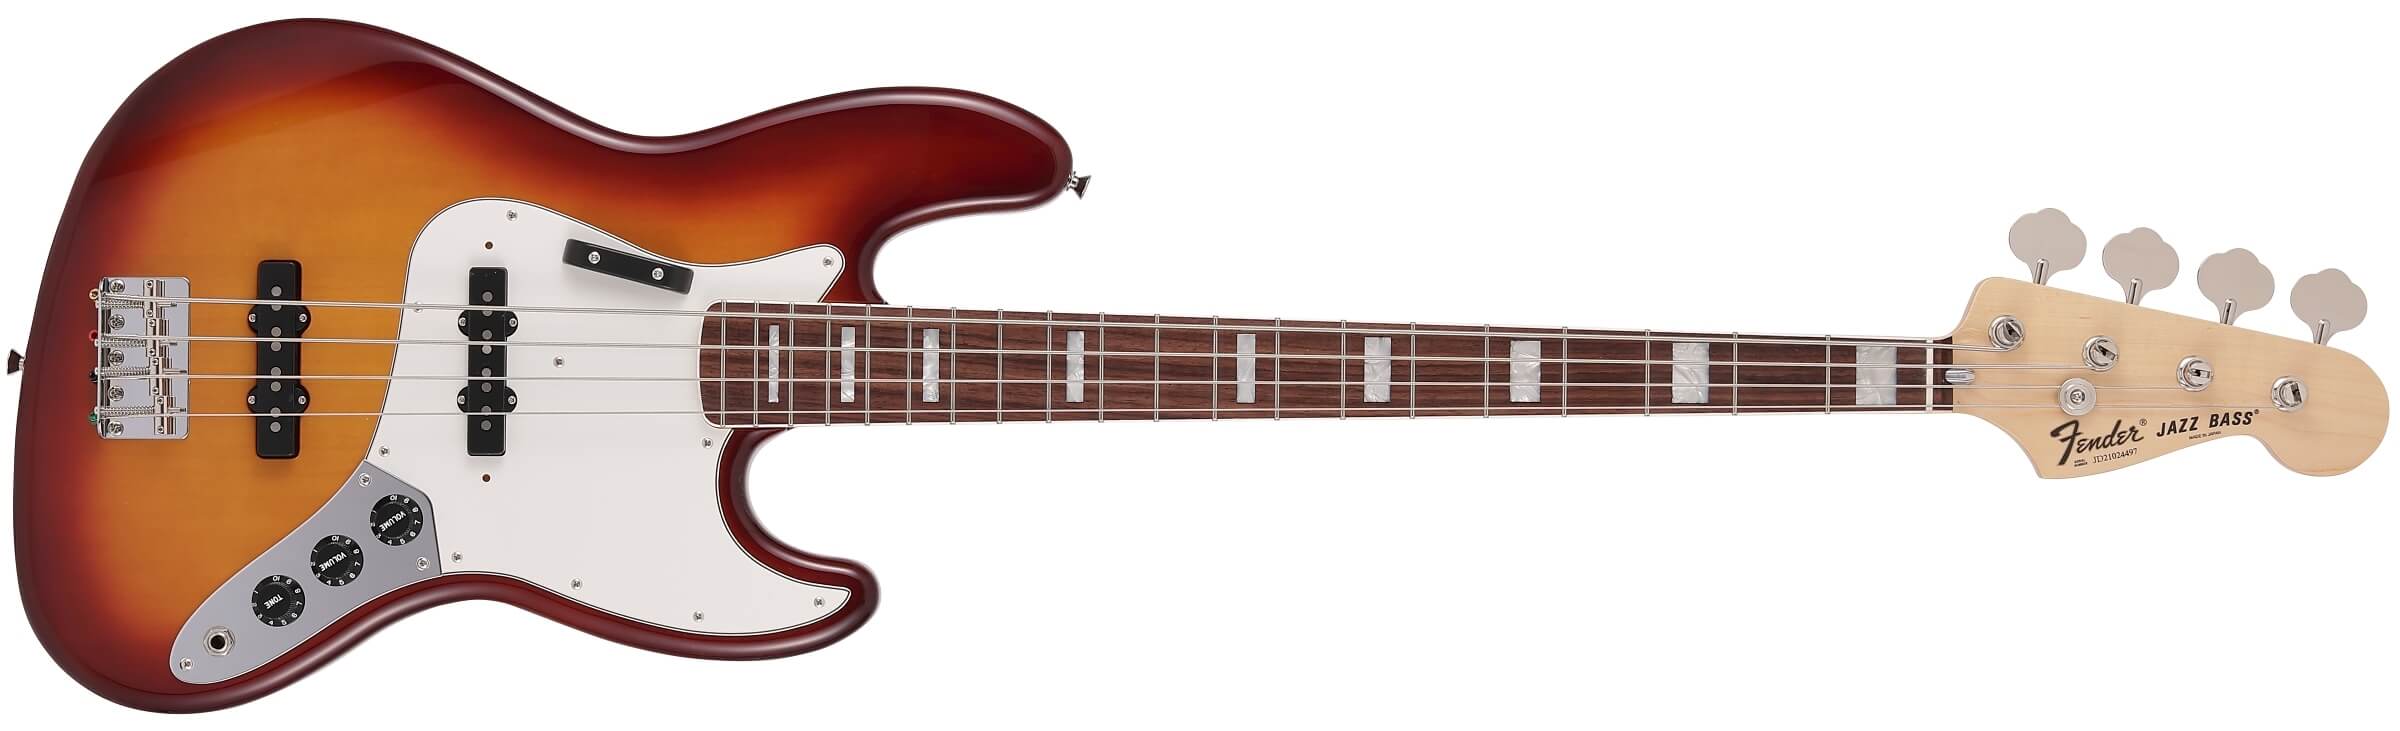 Made in Japan Limited International Color Jazz Bass